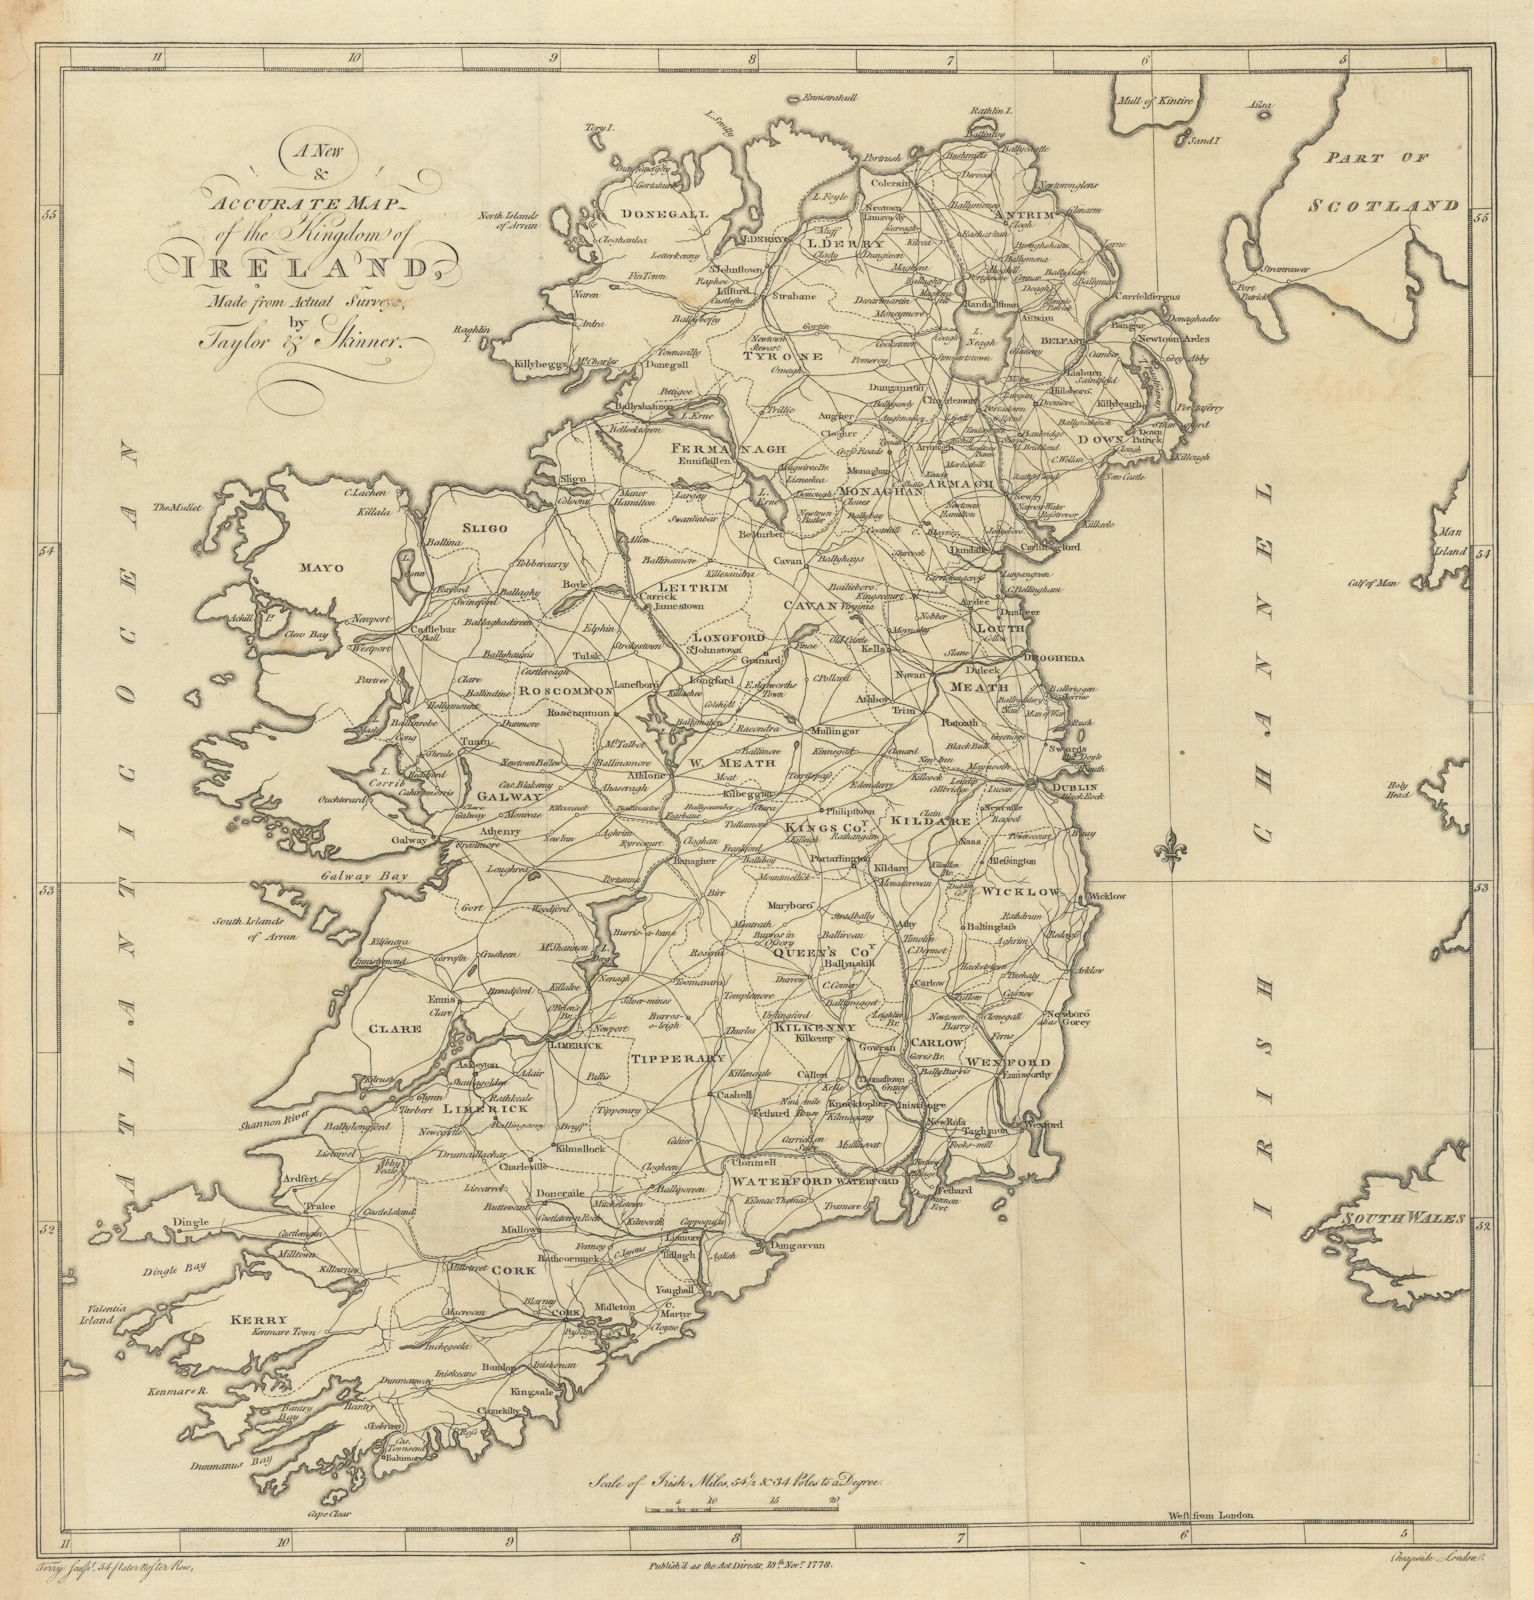 A New & Accurate Map of the Kingdom of Ireland, by Taylor & Skinner 1778